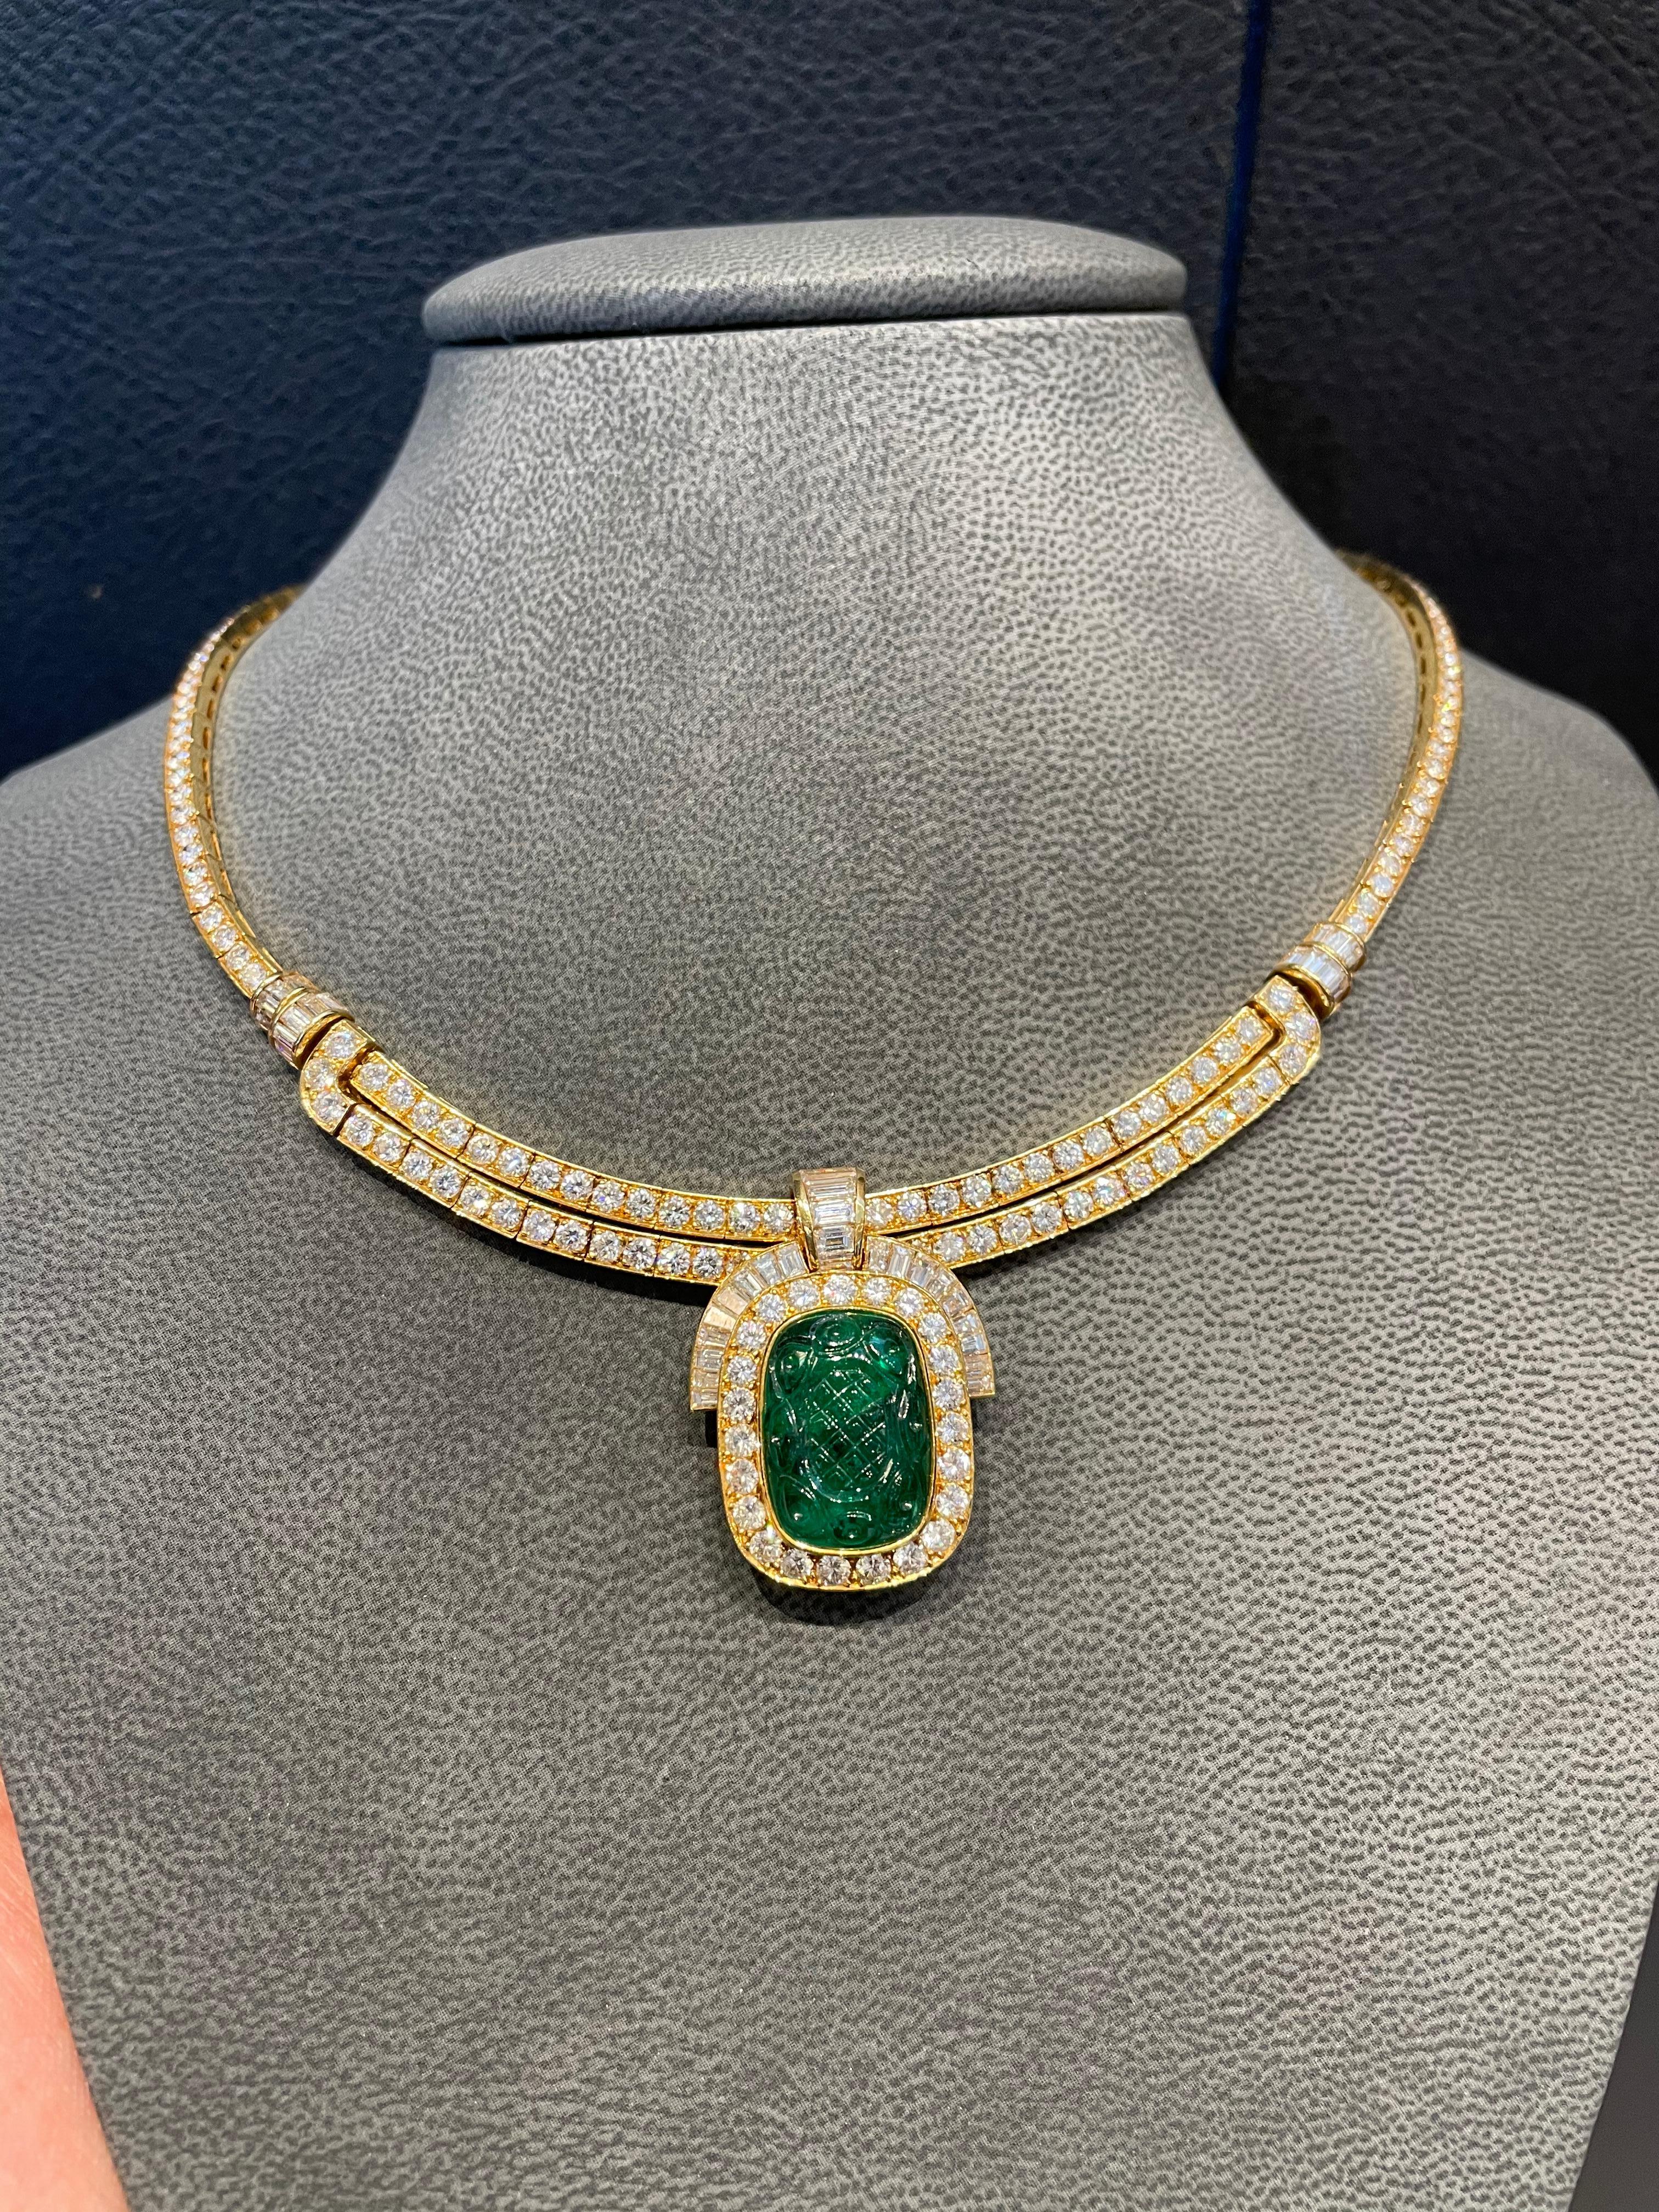 Van Cleef & Arpels Carved Emerald and Diamond Necklace 7